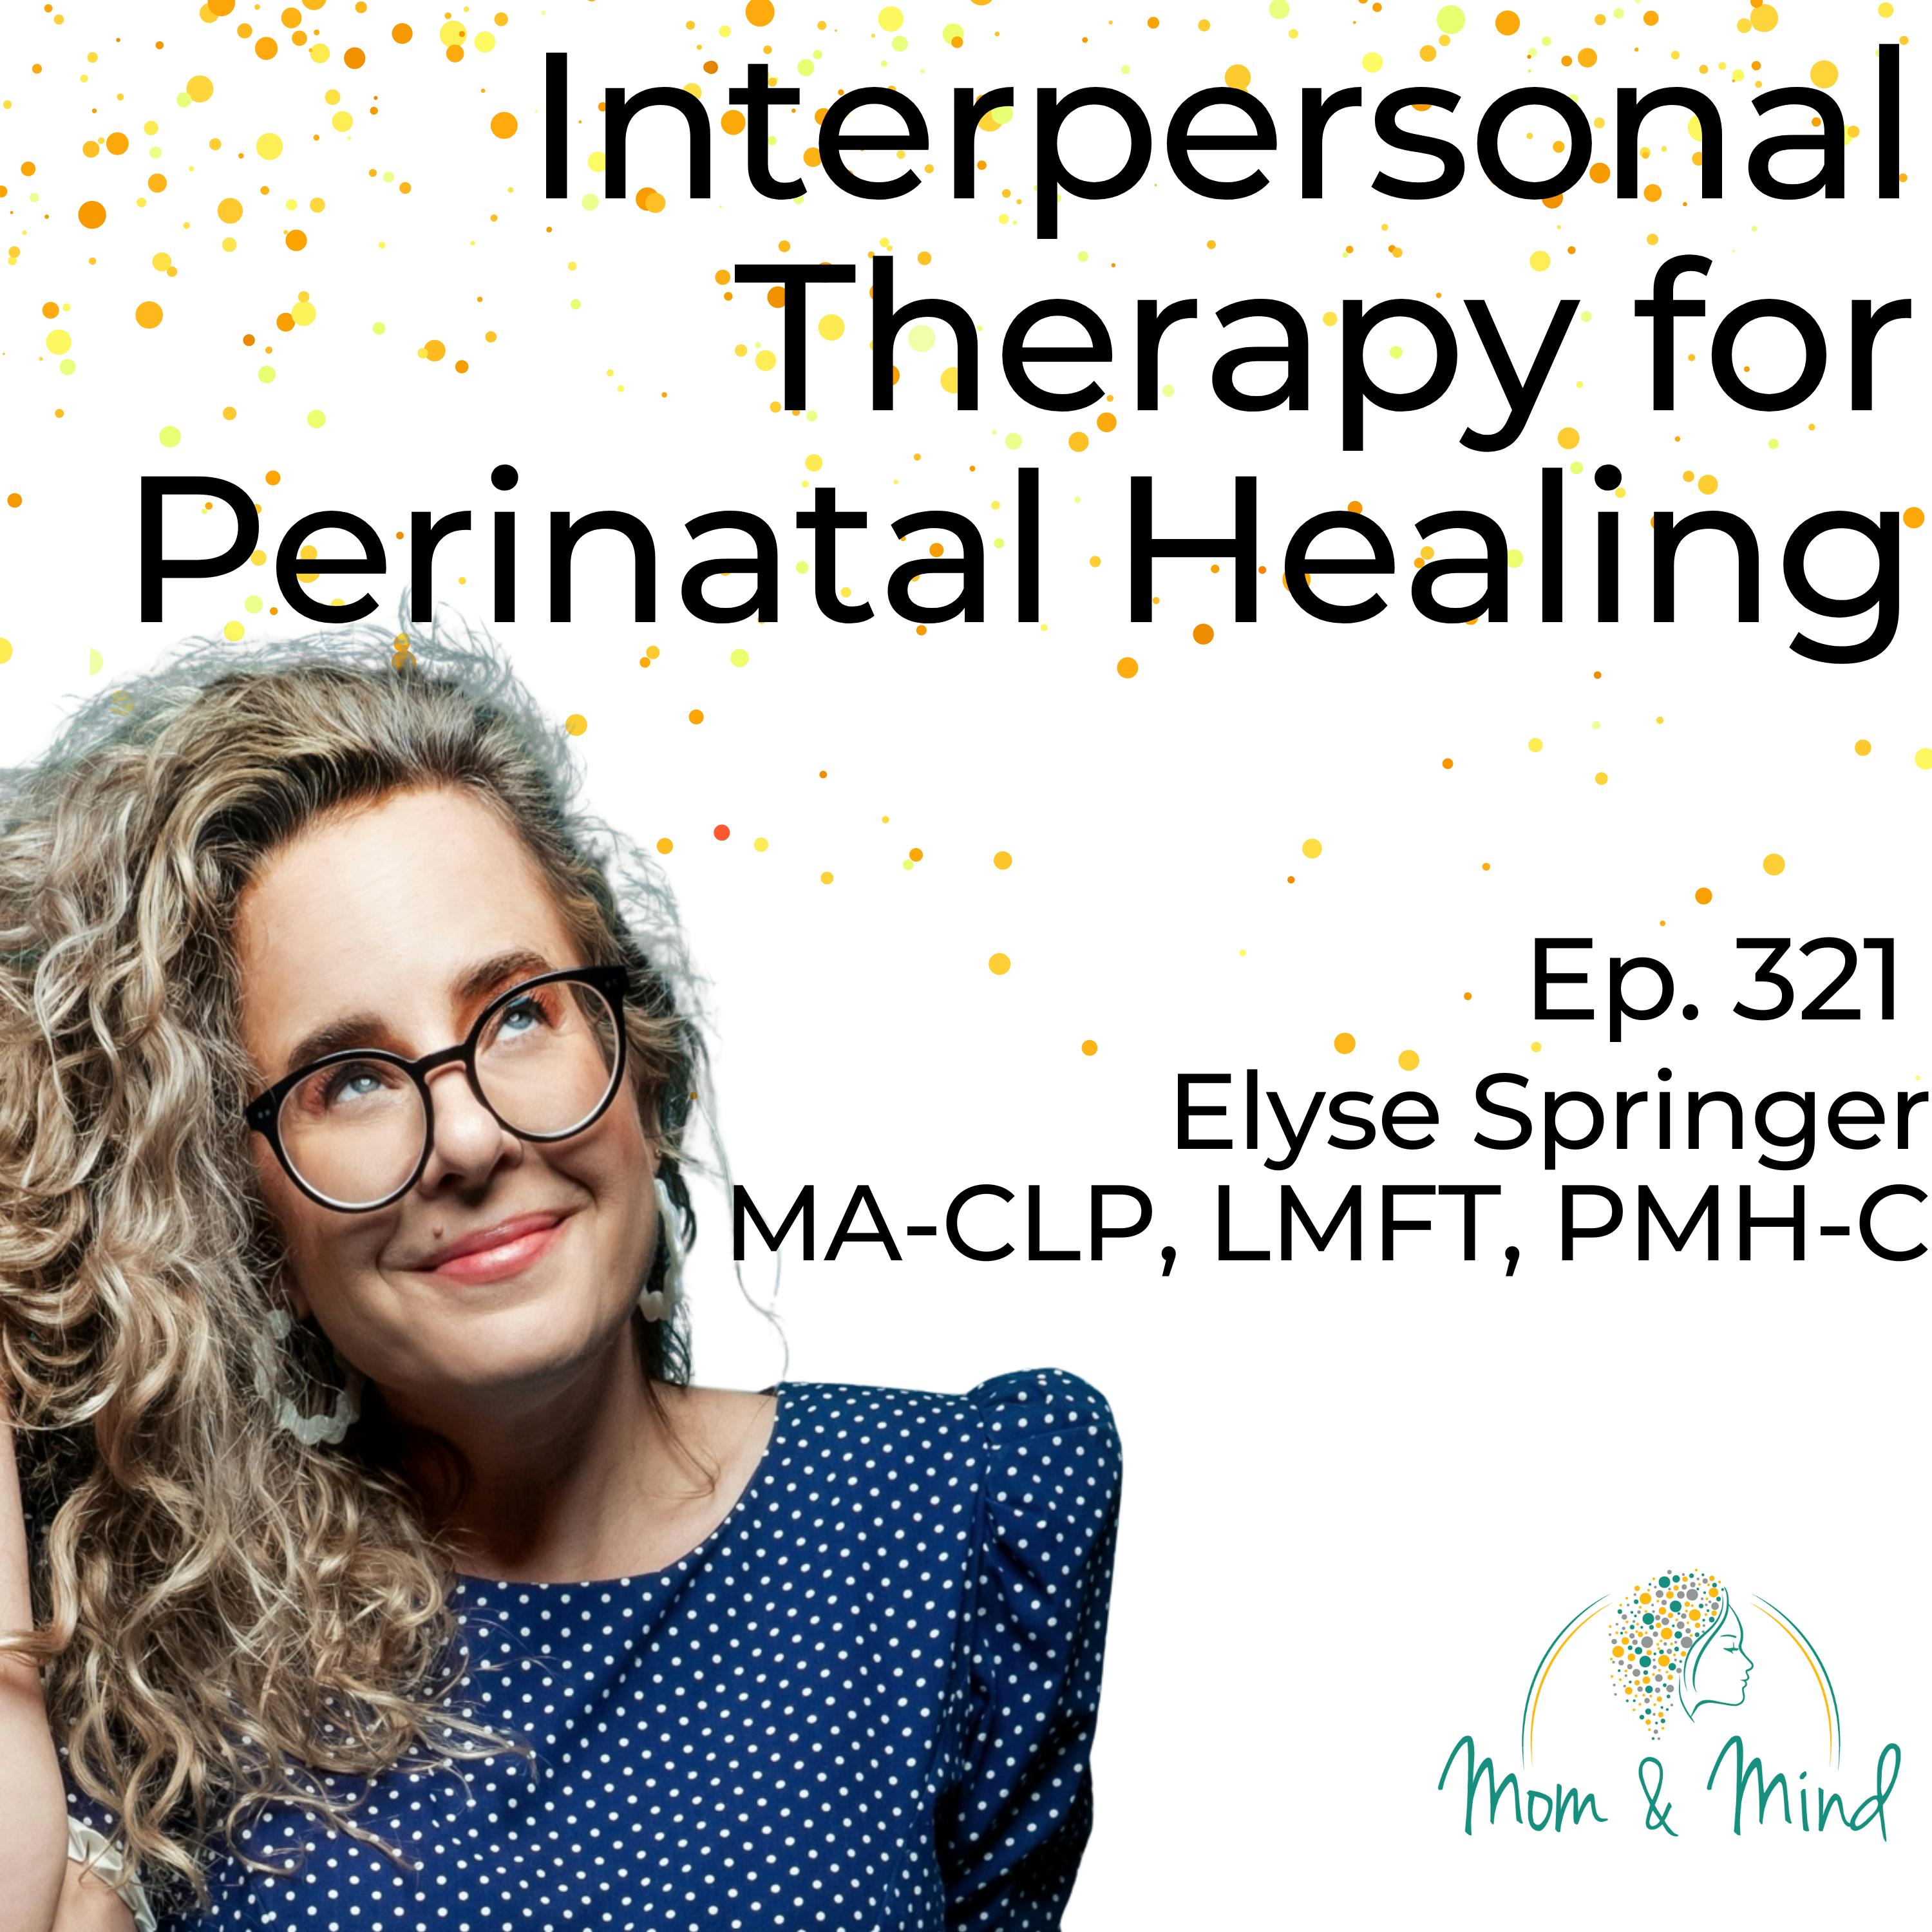 321: Interpersonal Therapy for Perinatal Healing with Elyse Springer, MA-CLP,LMFT,PMH-C